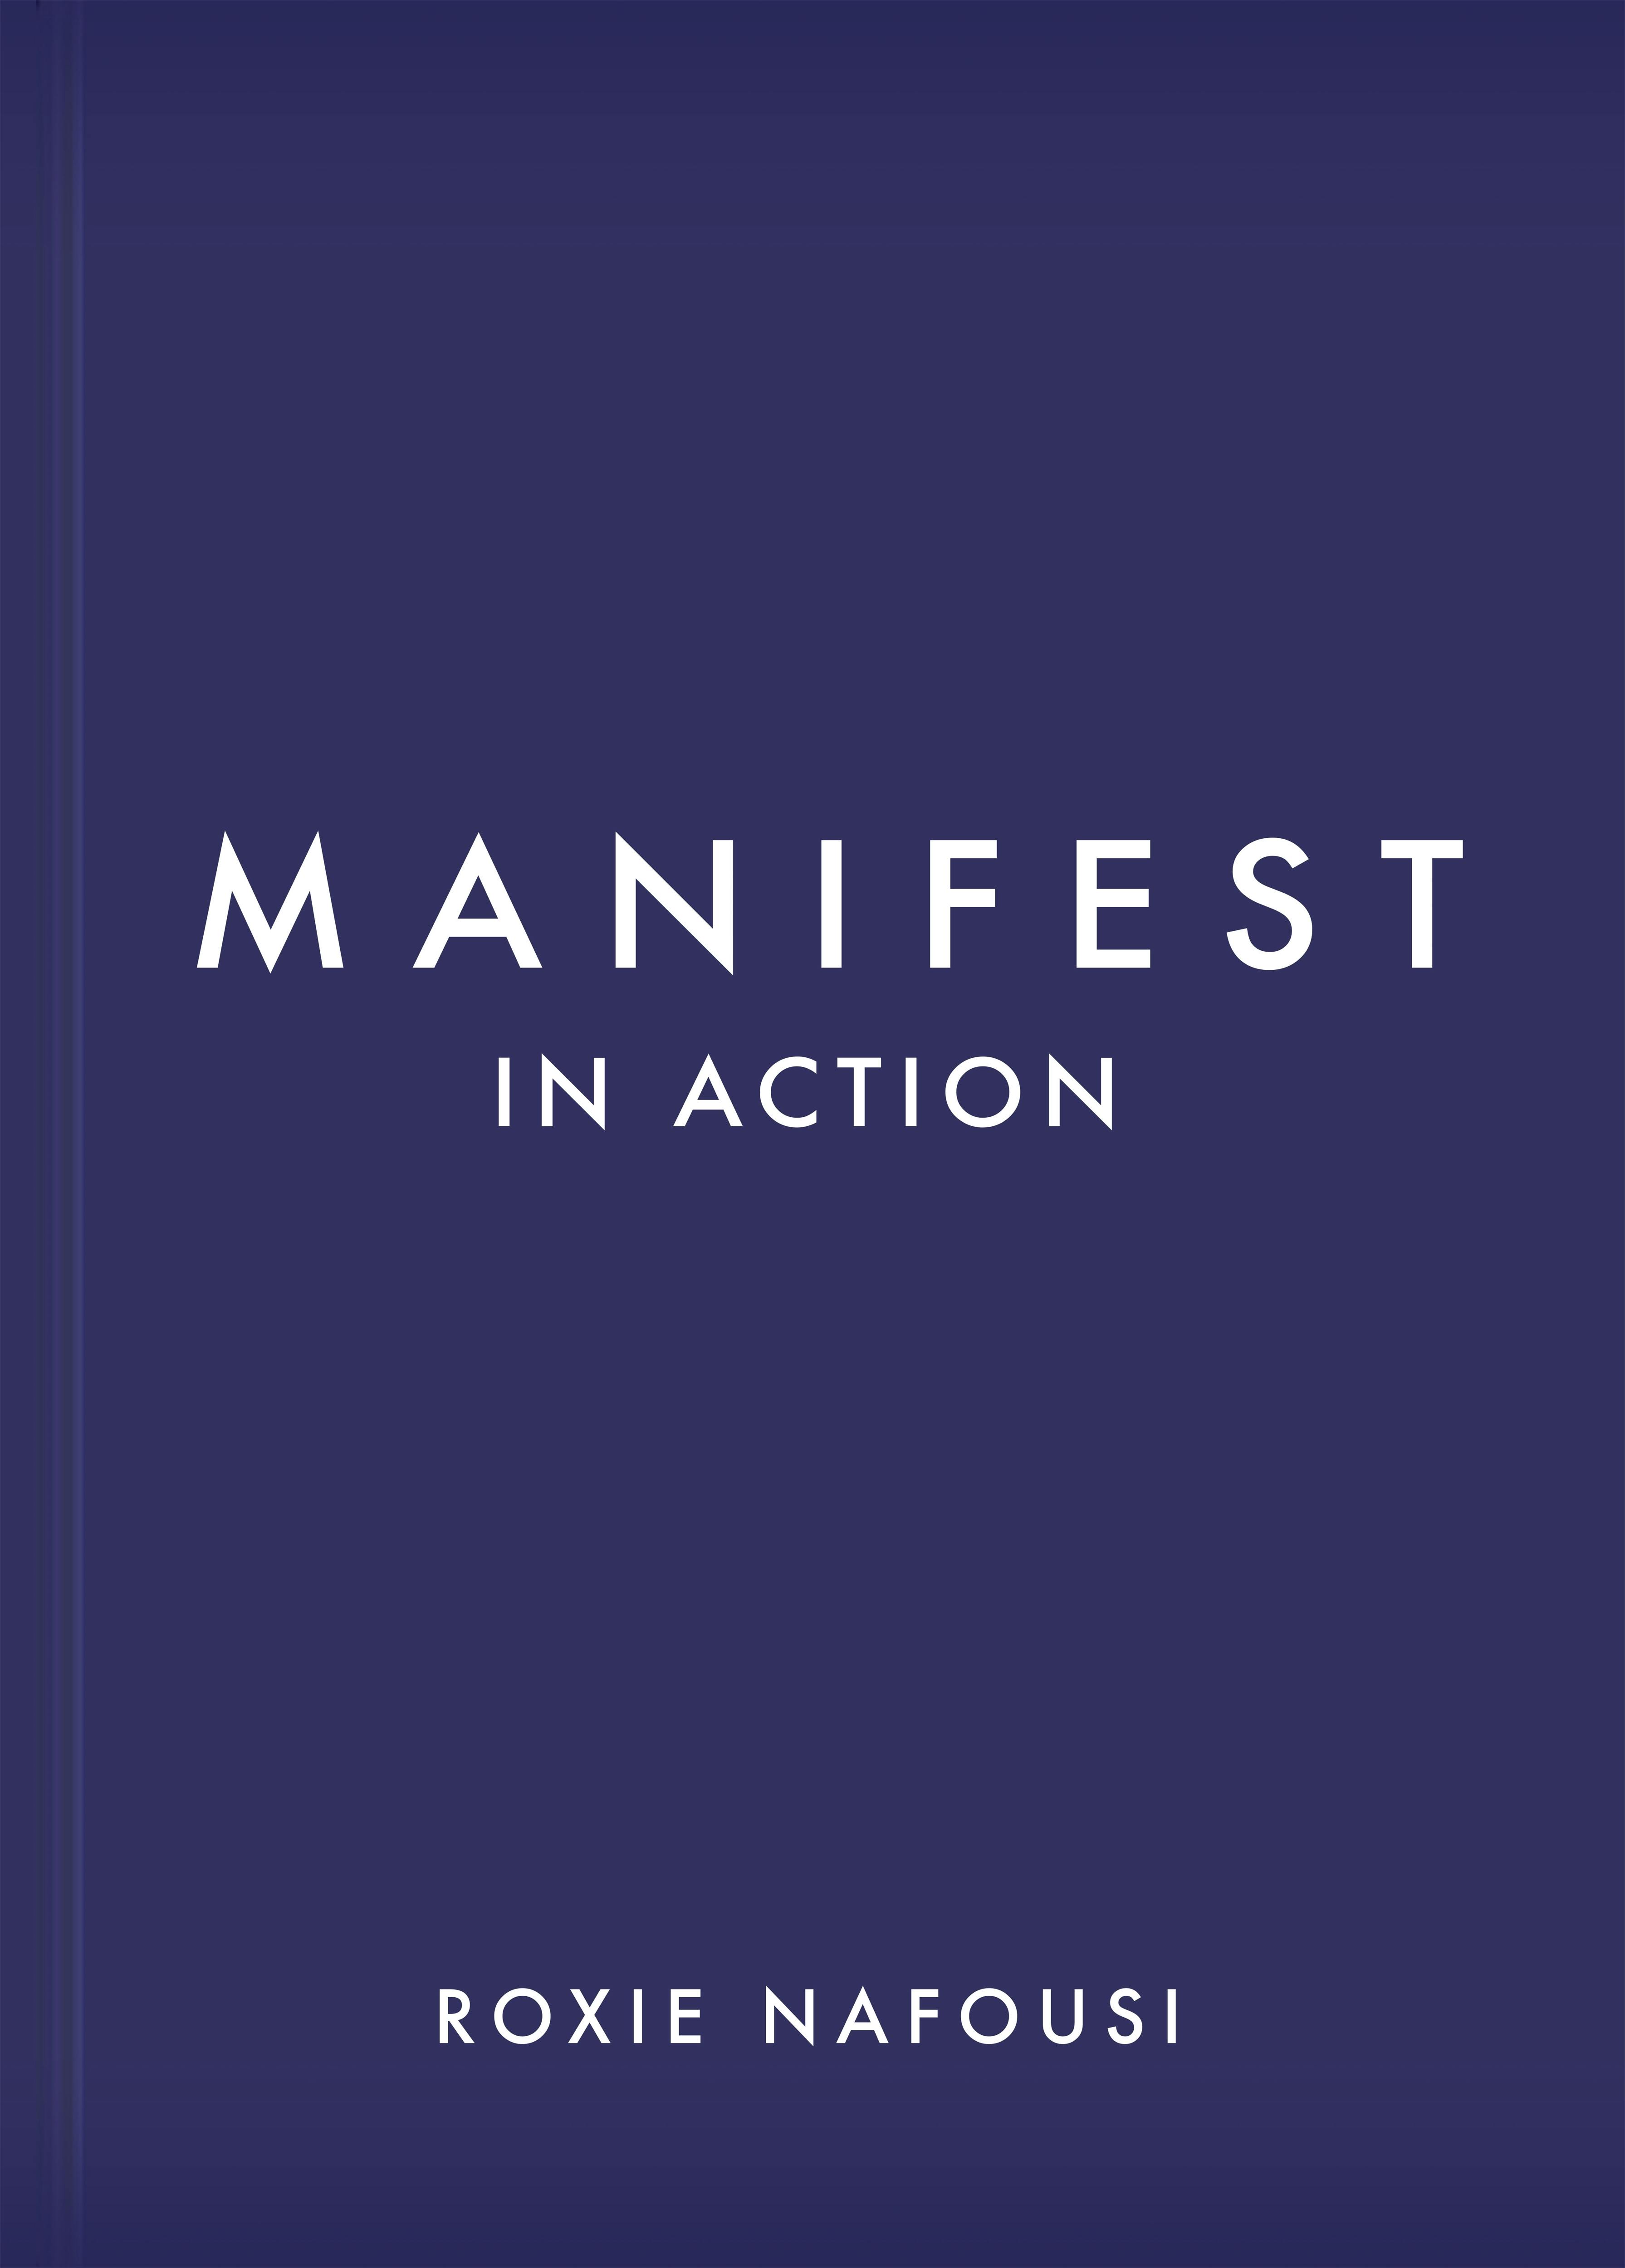 Describes for Manifest in Action by authors